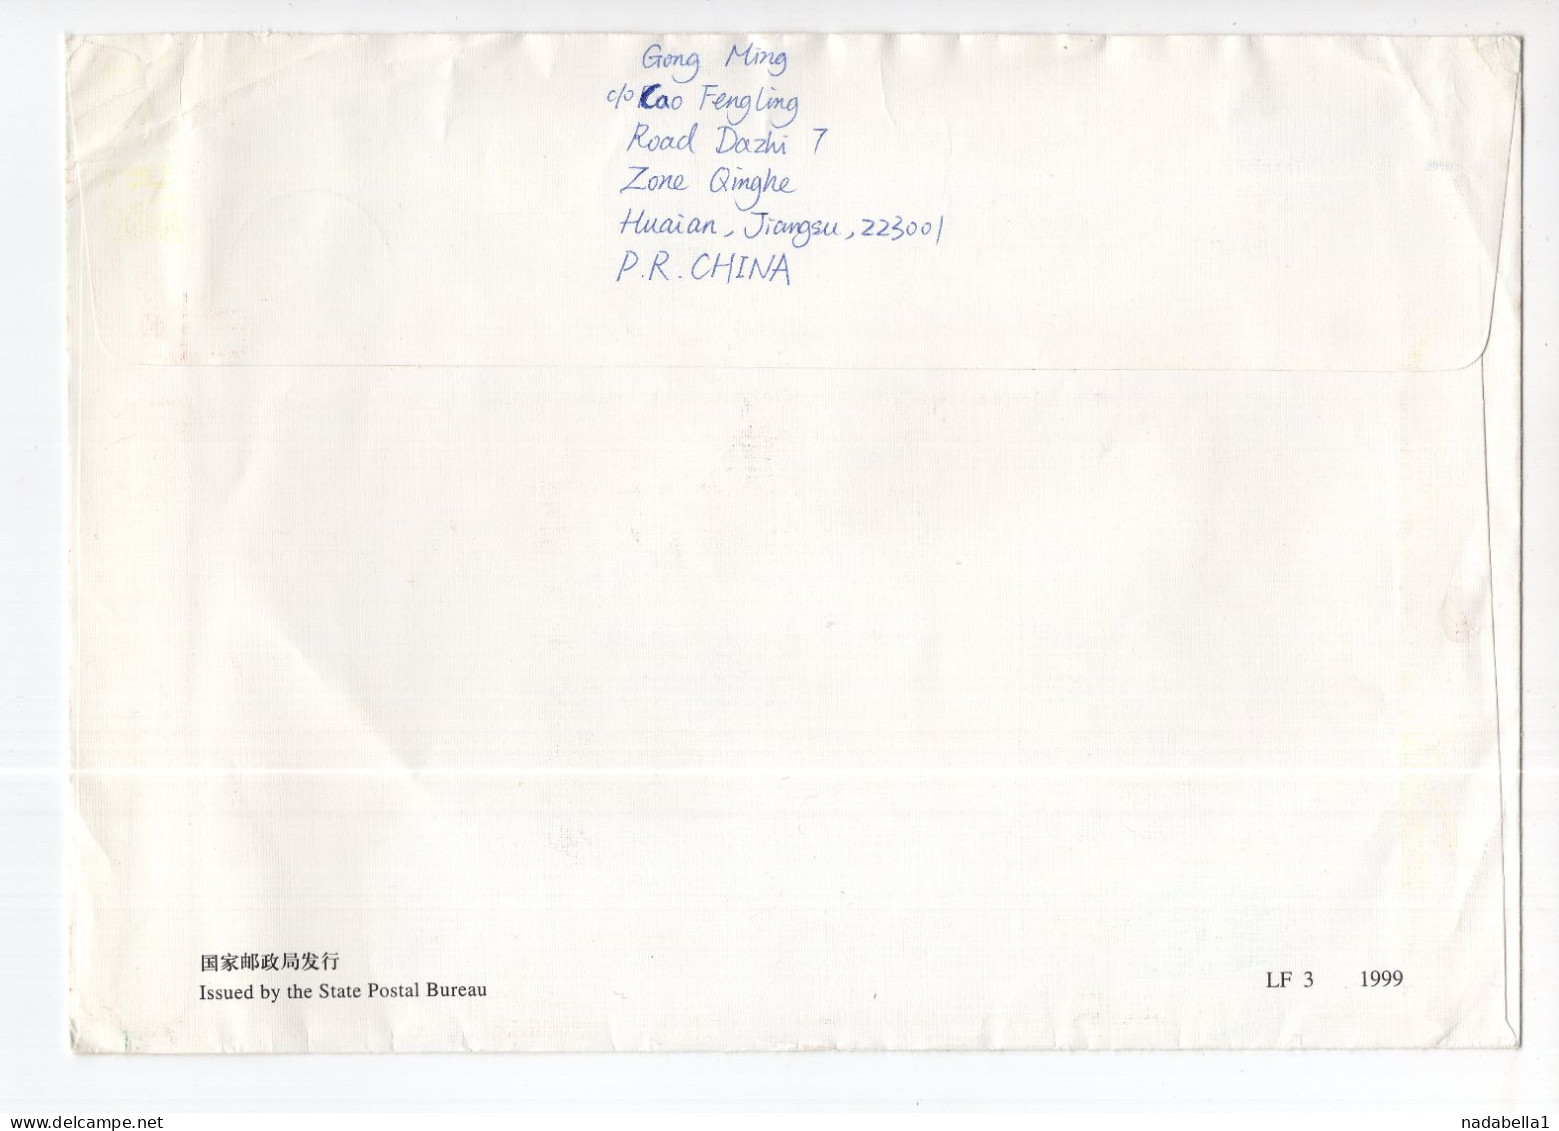 2006. CHINA,AIRMAIL STATIONERY COVER,23 X 16 Cm,SENT TO SERBIA FOOTBALL ASSOCIATION,BELGRADE - Luchtpost